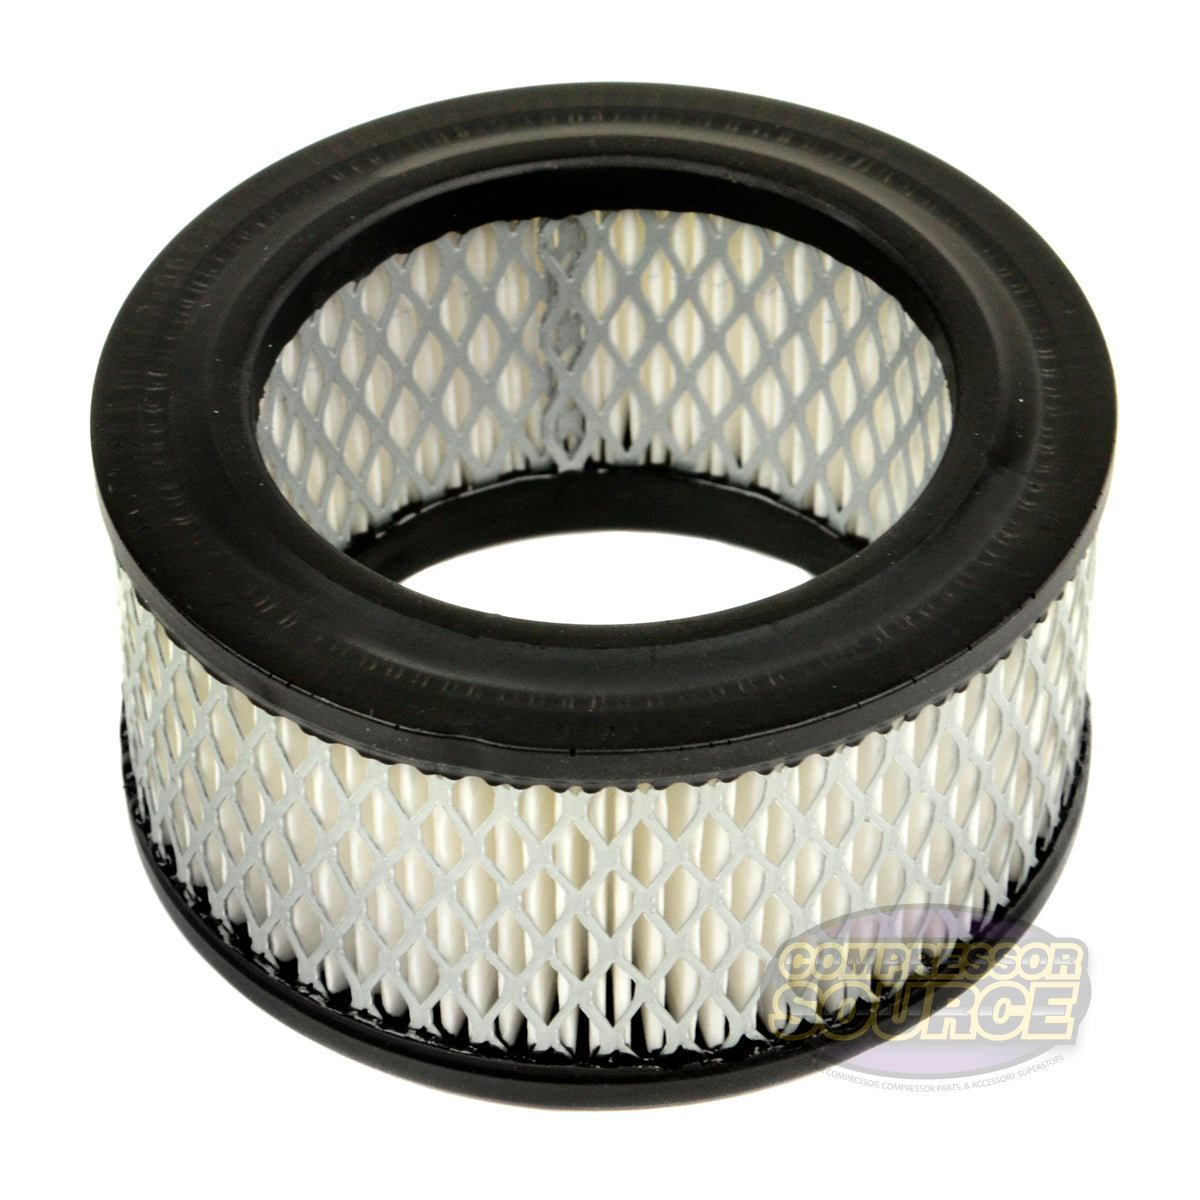 6 Air Compressor Air Intake Filter Elements #14 A424 For Ingersoll Rand Replacement 32170979